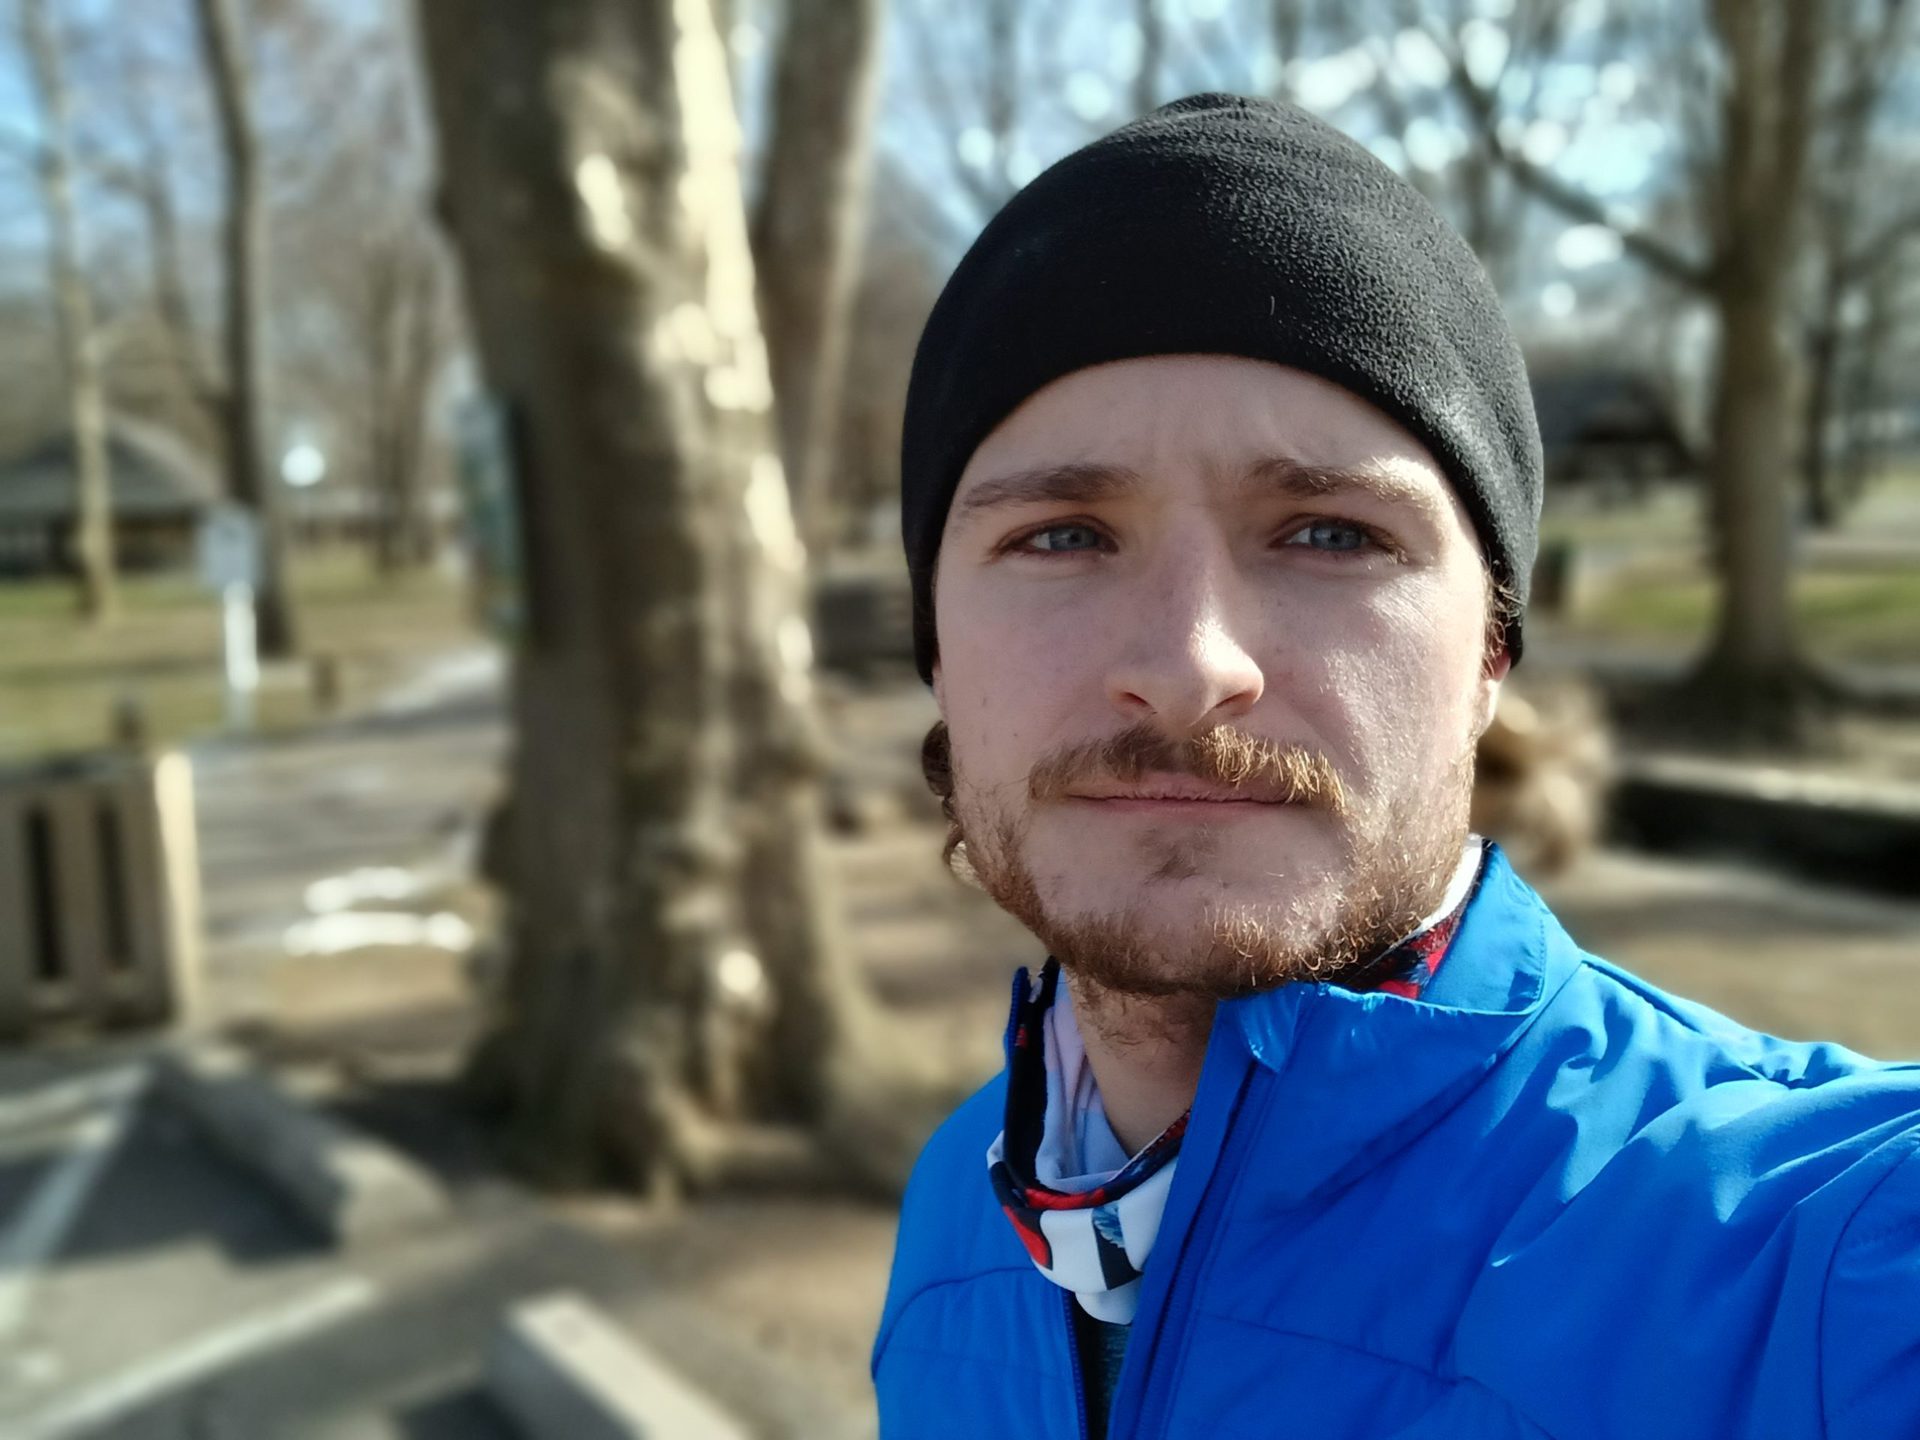 Galaxy A13 portrait selfie taken outdoors of a man with facial hair wearing a black hat and a bright blue jacket